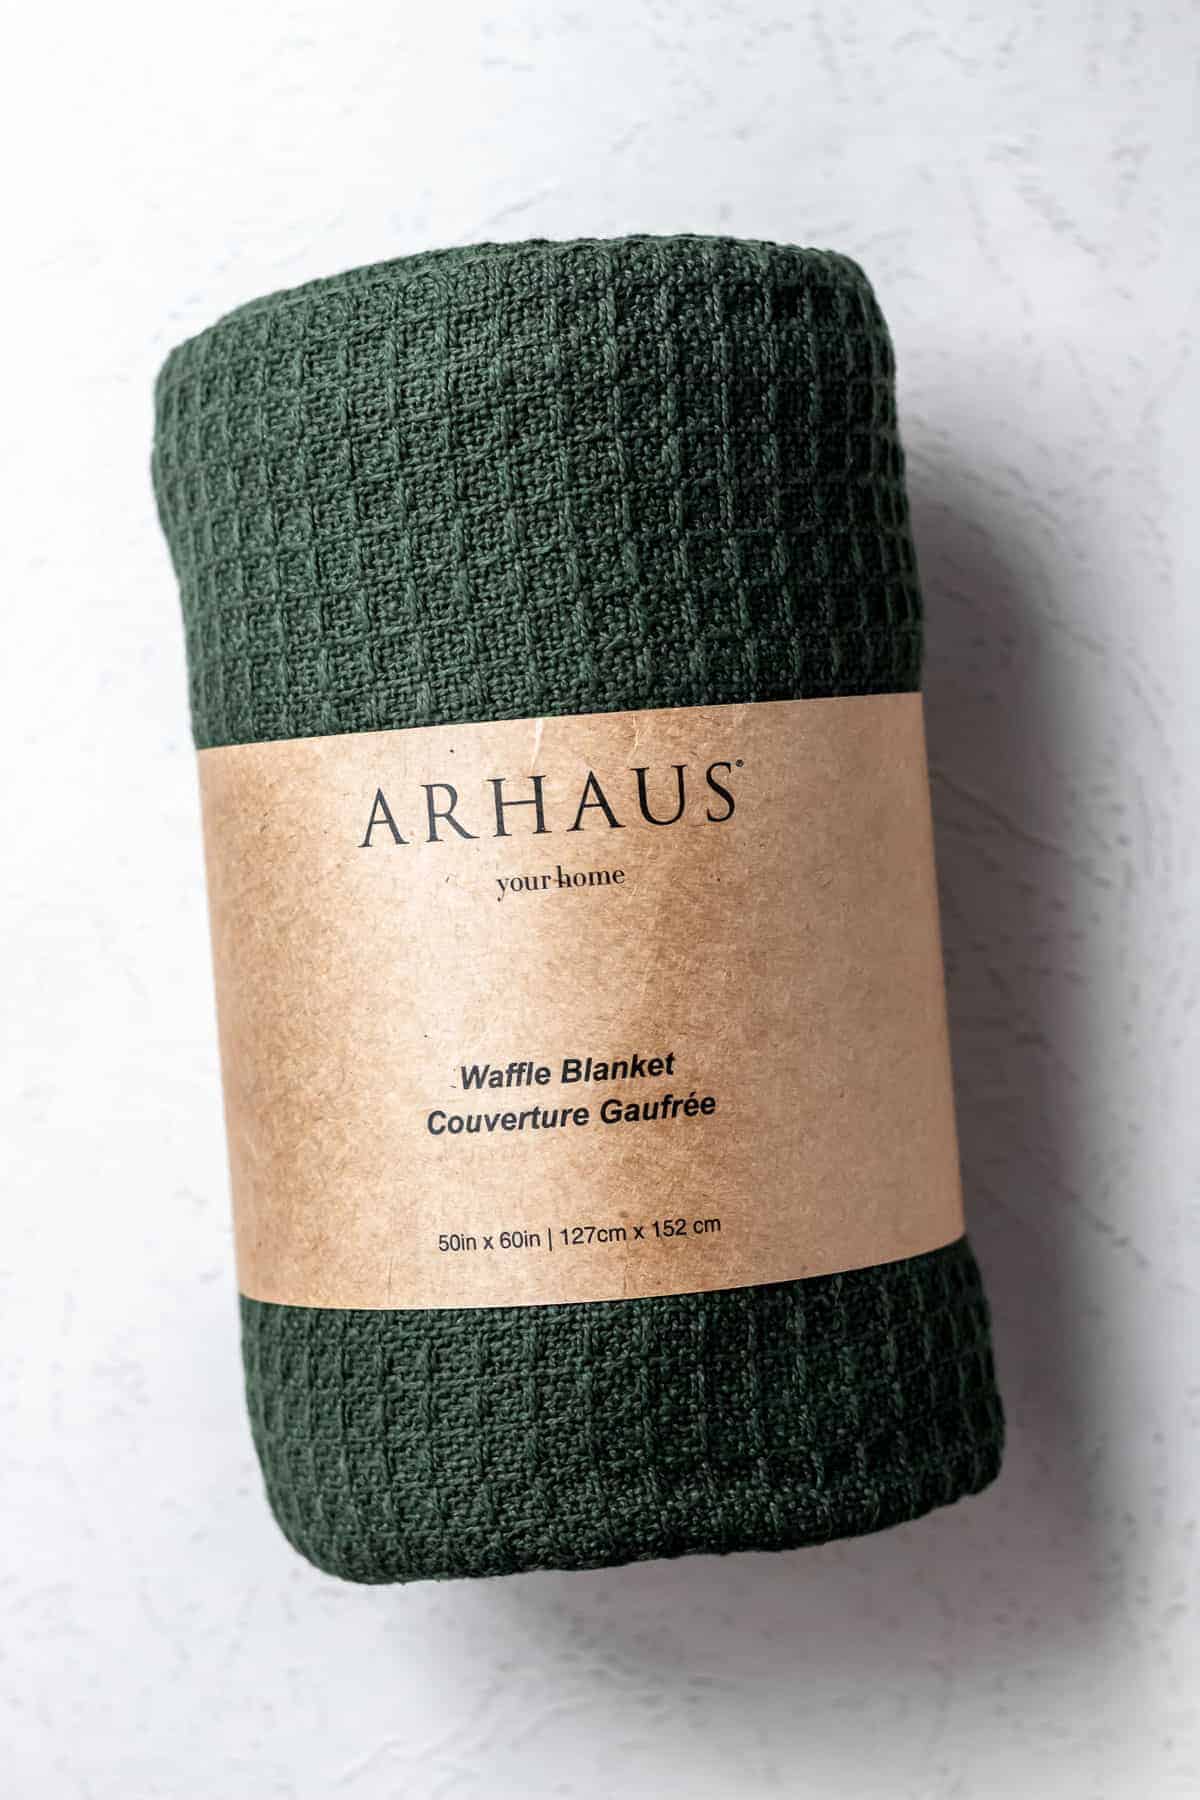 Arhaus Waffle Knit 100% Cotton Throw Blanket in green rolled up in it's packaging